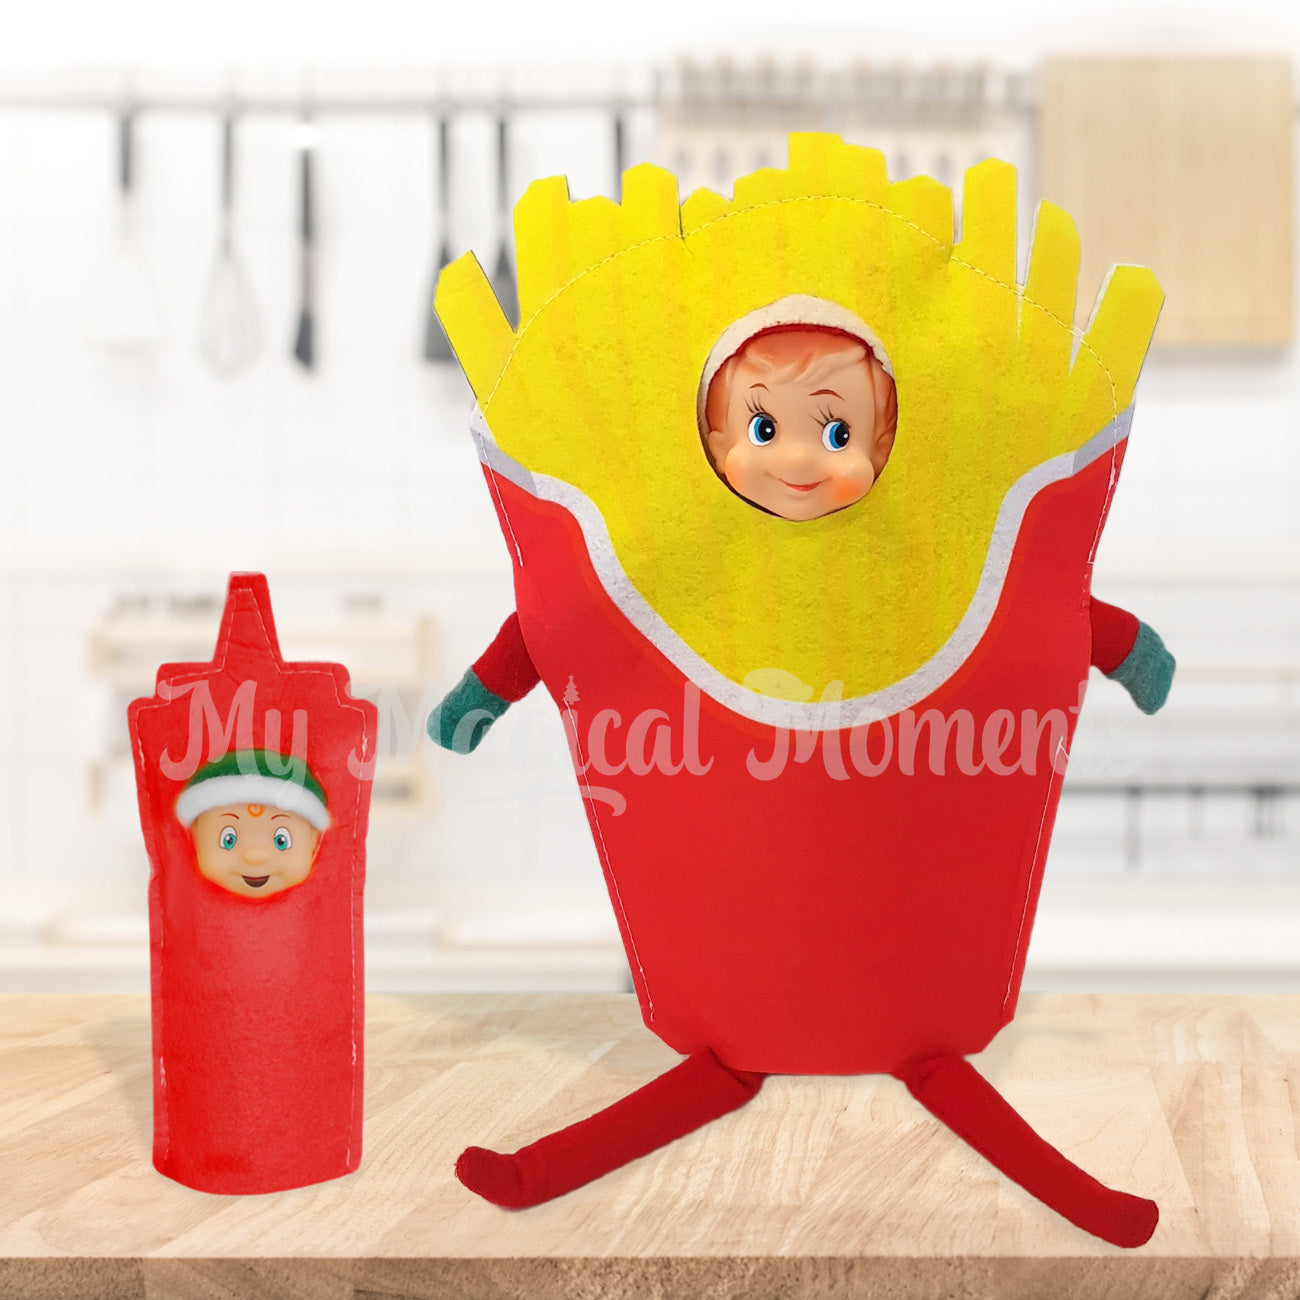 Elf dressed as hot chips and ketchup bottle worn by an elf toddler